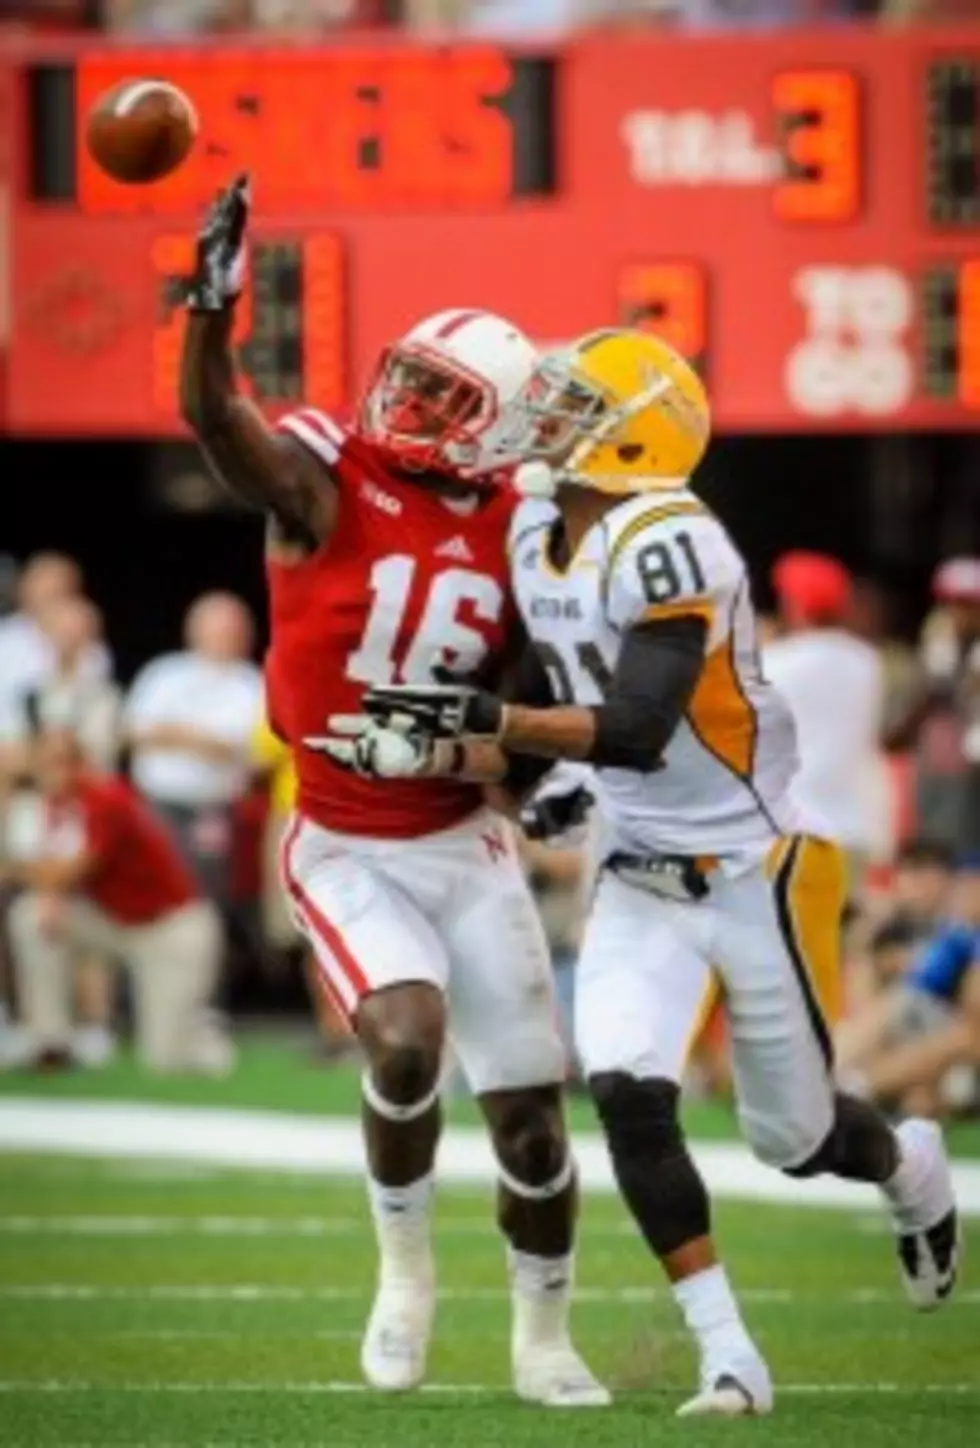 Saints Select Stanley Jean Baptiste With 2nd Round Draft Pick [Video]